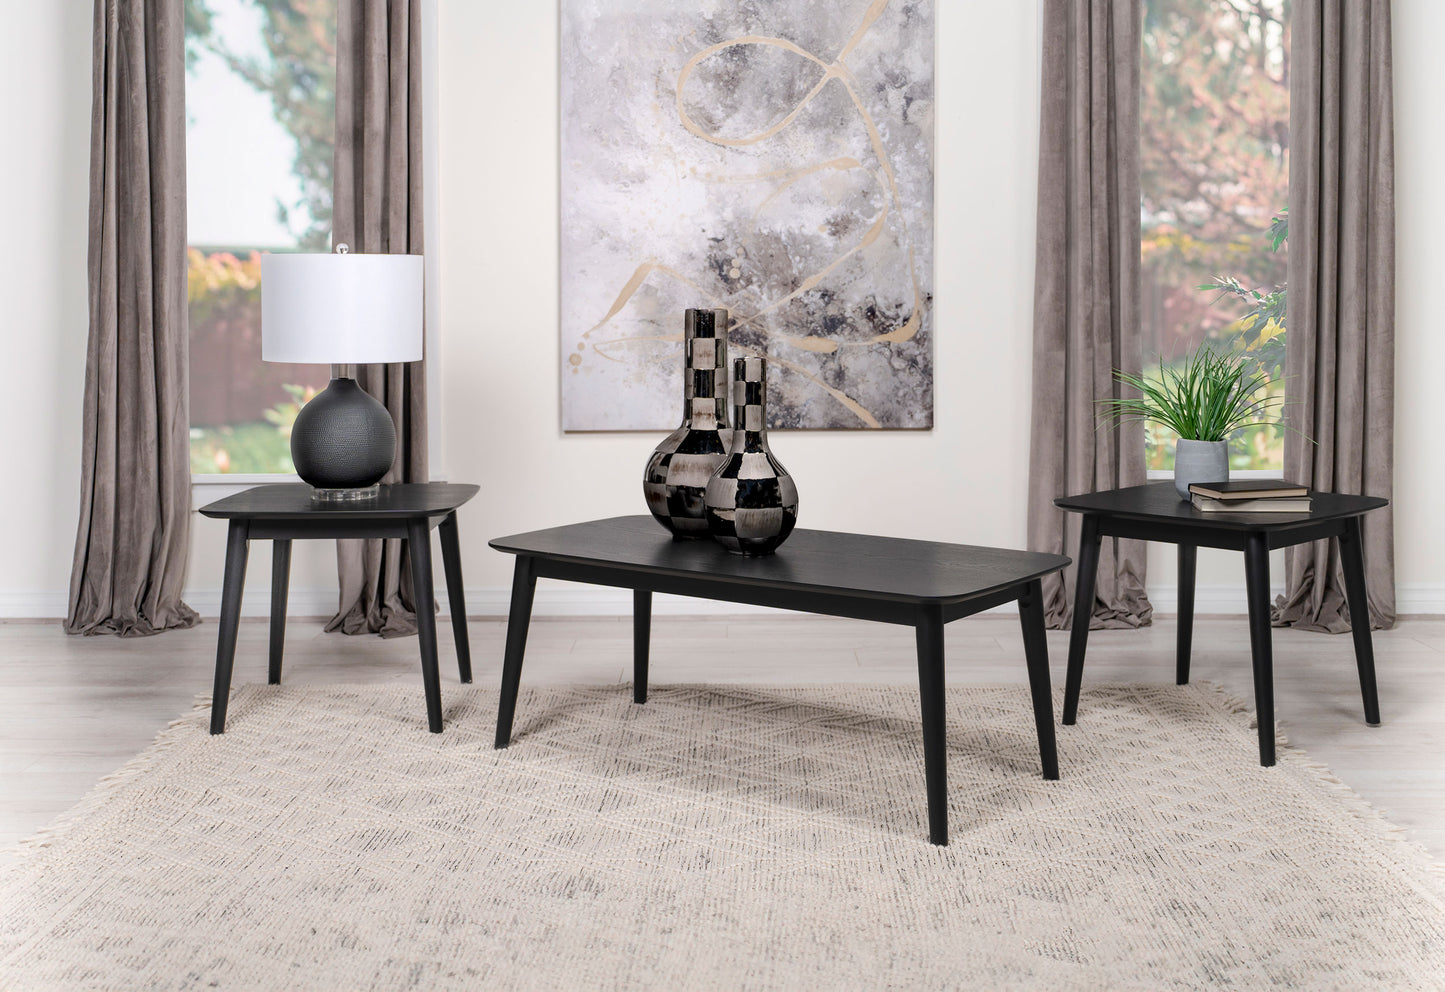 Carey 3-piece Occasional Set with Coffee and End Tables Black